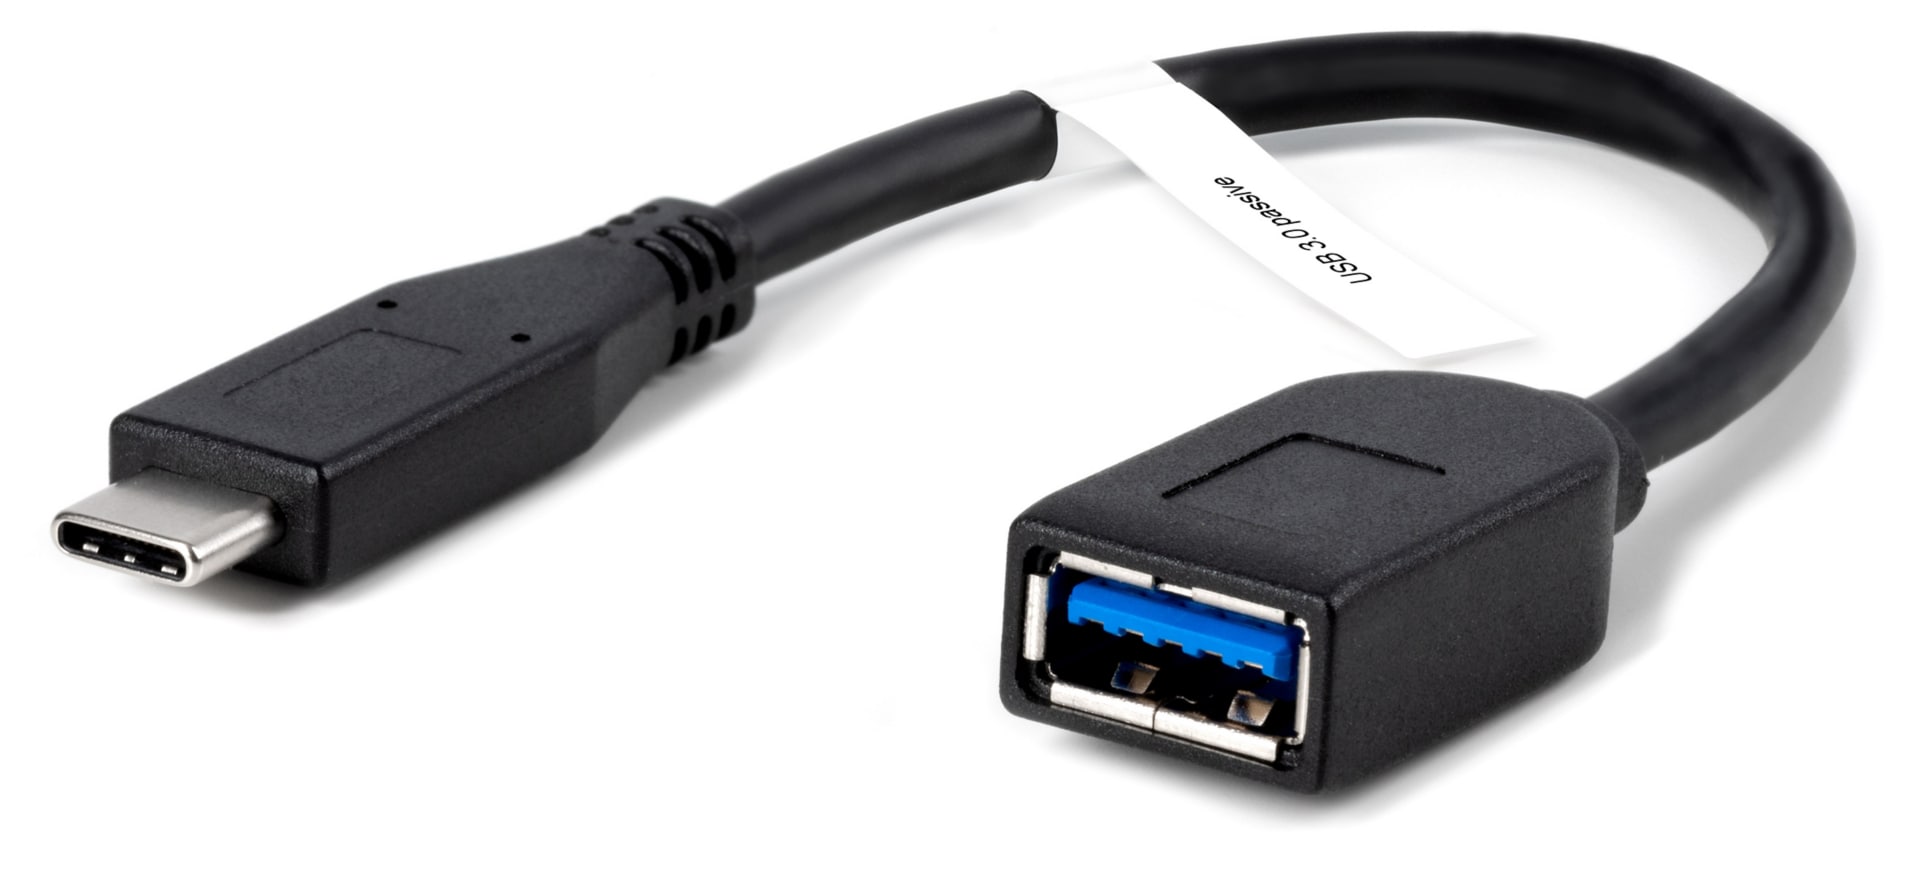 Plugable USB C to USB Adapter Cable